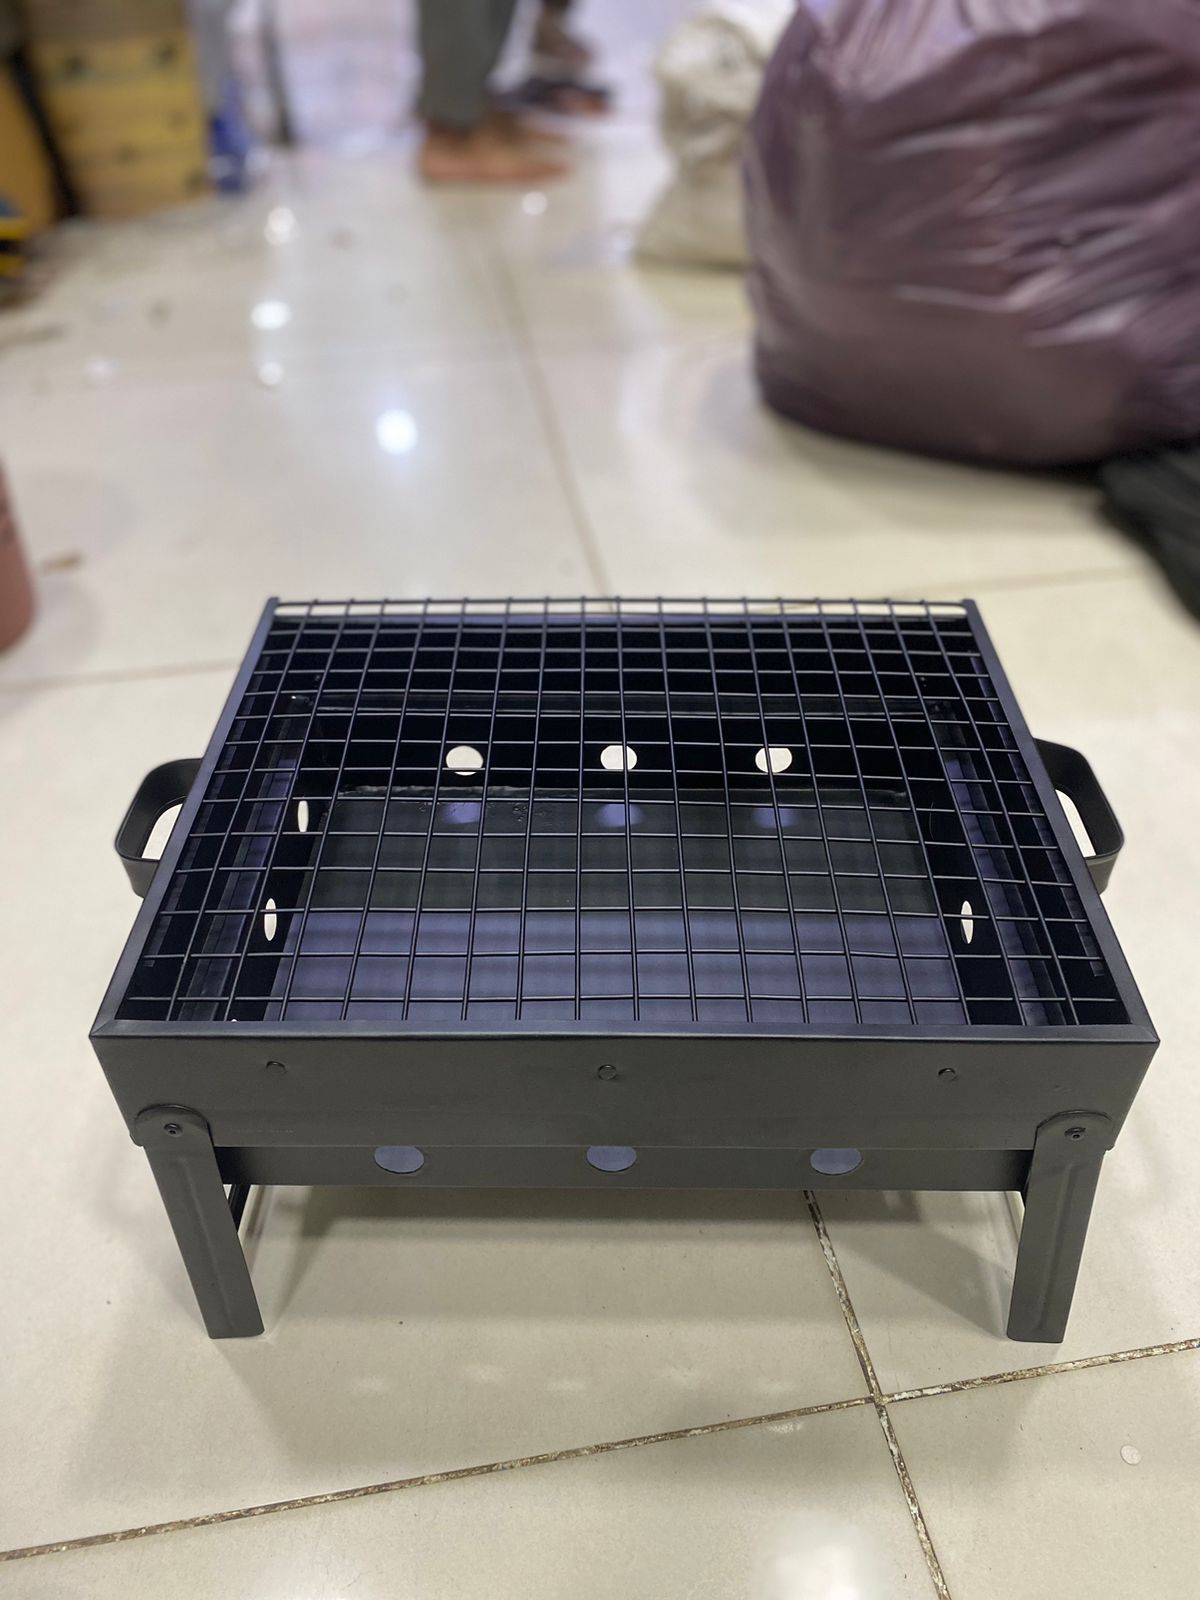 Stainless Steel BBQ Grill Foldable